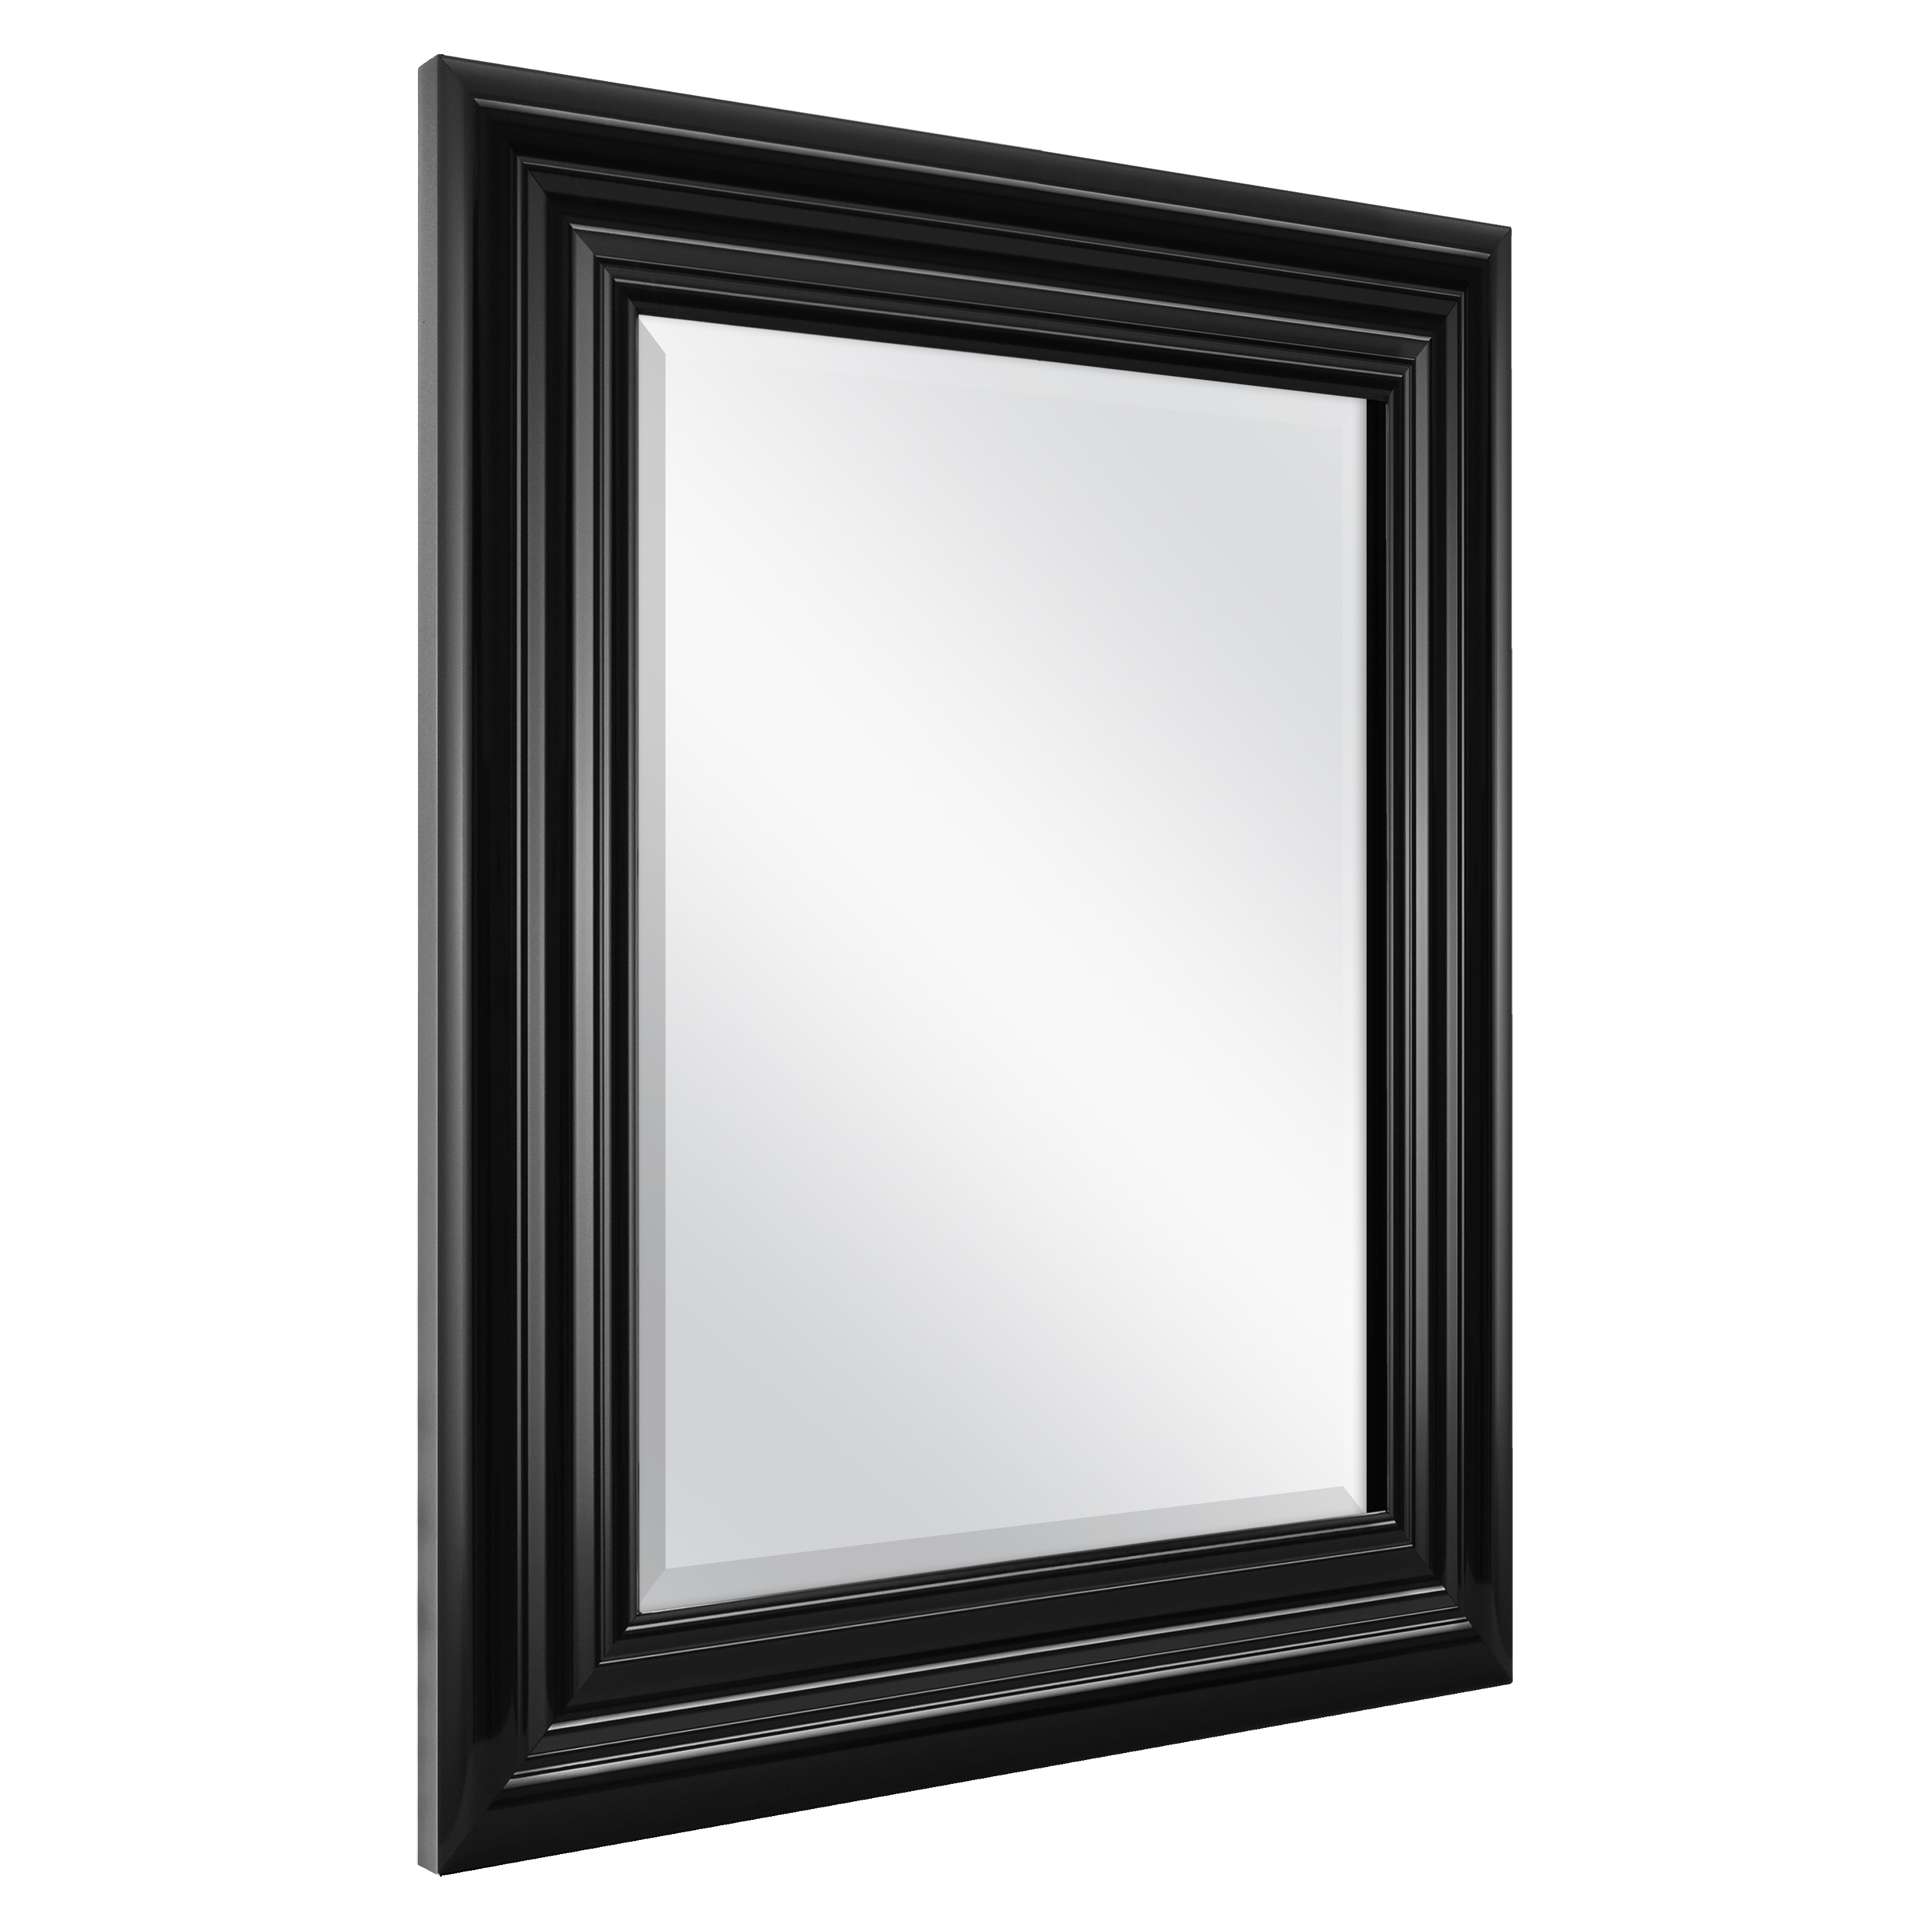 Better Homes & Gardens 23x27 Inch Black Beveled Wall Mirror - image 5 of 6